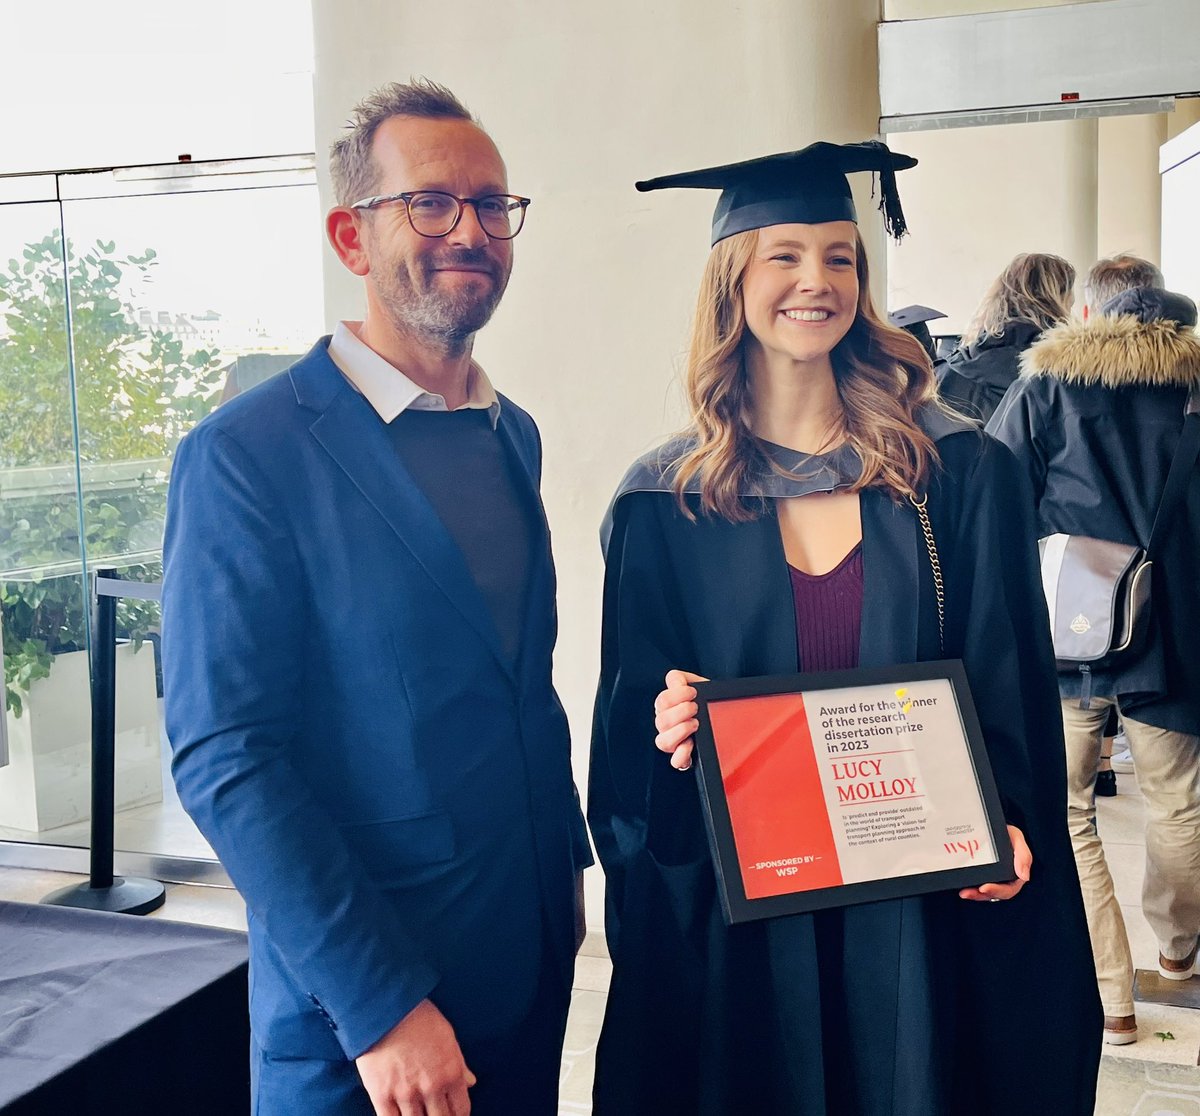 Massive congratulations to all our @MScTransportUoW graduates! Such a joy to participate to this important day with you. Special thanks to @wsp and @AdrianHames sponsoring the best dissertation prize!! Well done Lucy Molloy! @RachelAldred @UniWestminster @peter_bonfield